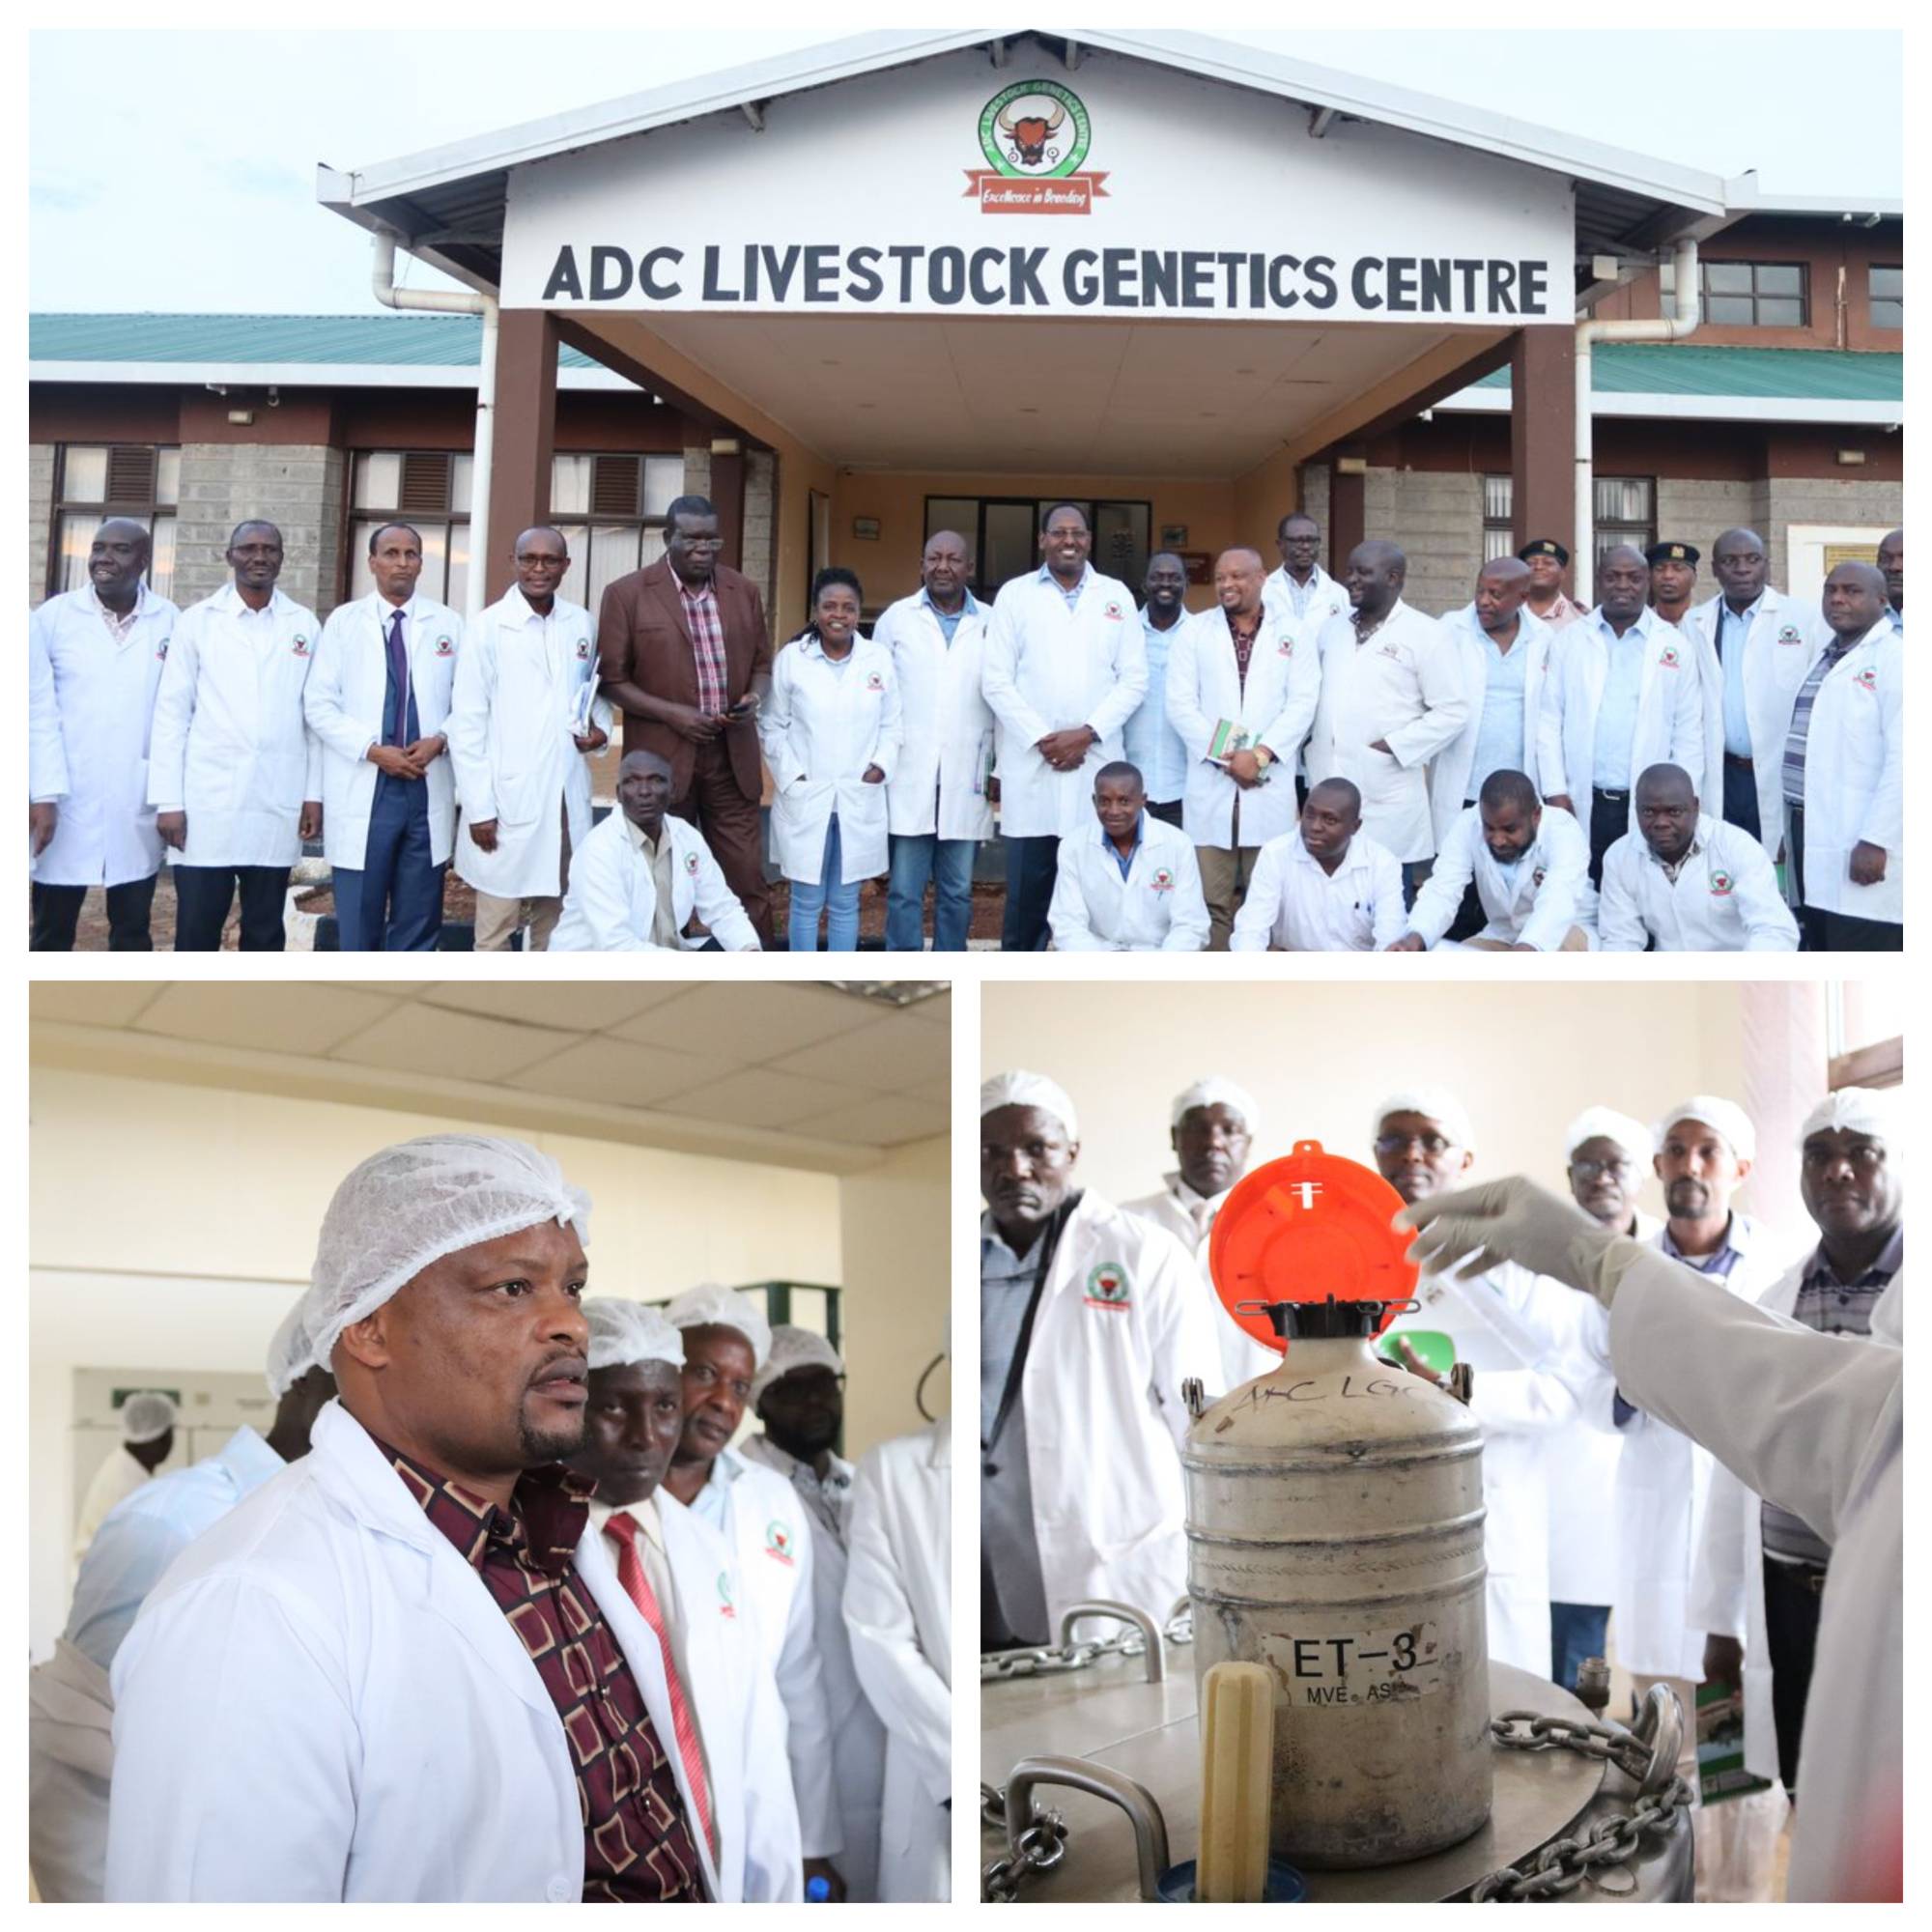 ASSEMBLY'S AGRICULTURE COMMITTEE INSPECTS LIVESTOCK GENETICS CENTER IN TRANS-NZOIA COUNTY